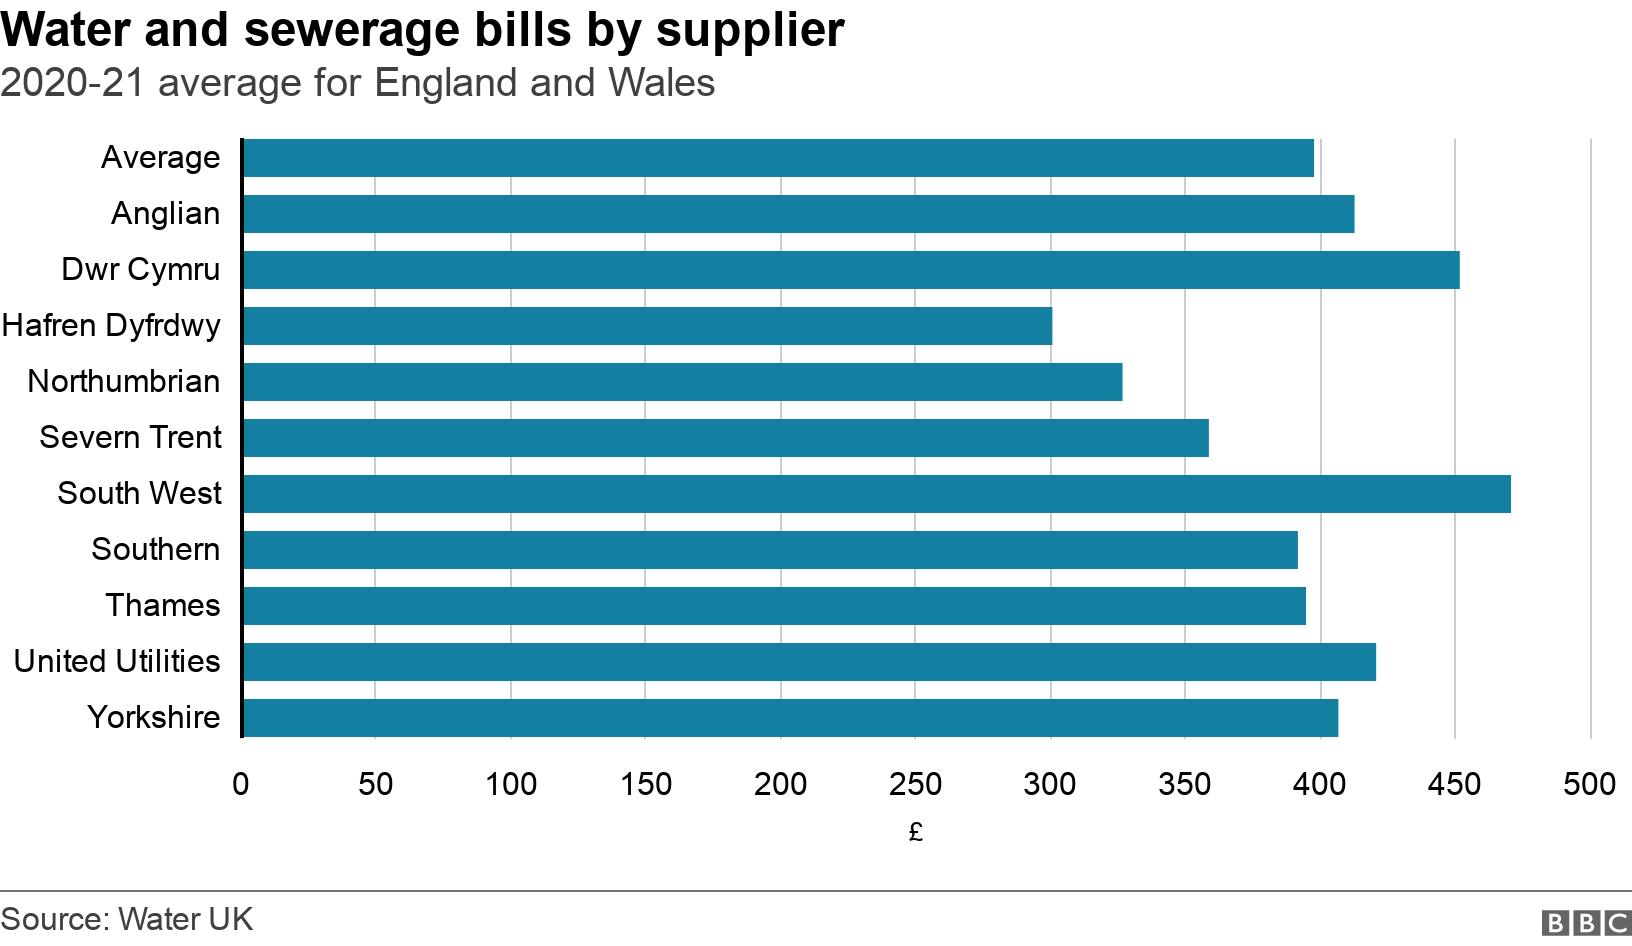 Water and sewerage bills by supplier. 2020-21 average for England and Wales. Chart showing average water and sewerage bill by supplier for 2020. .